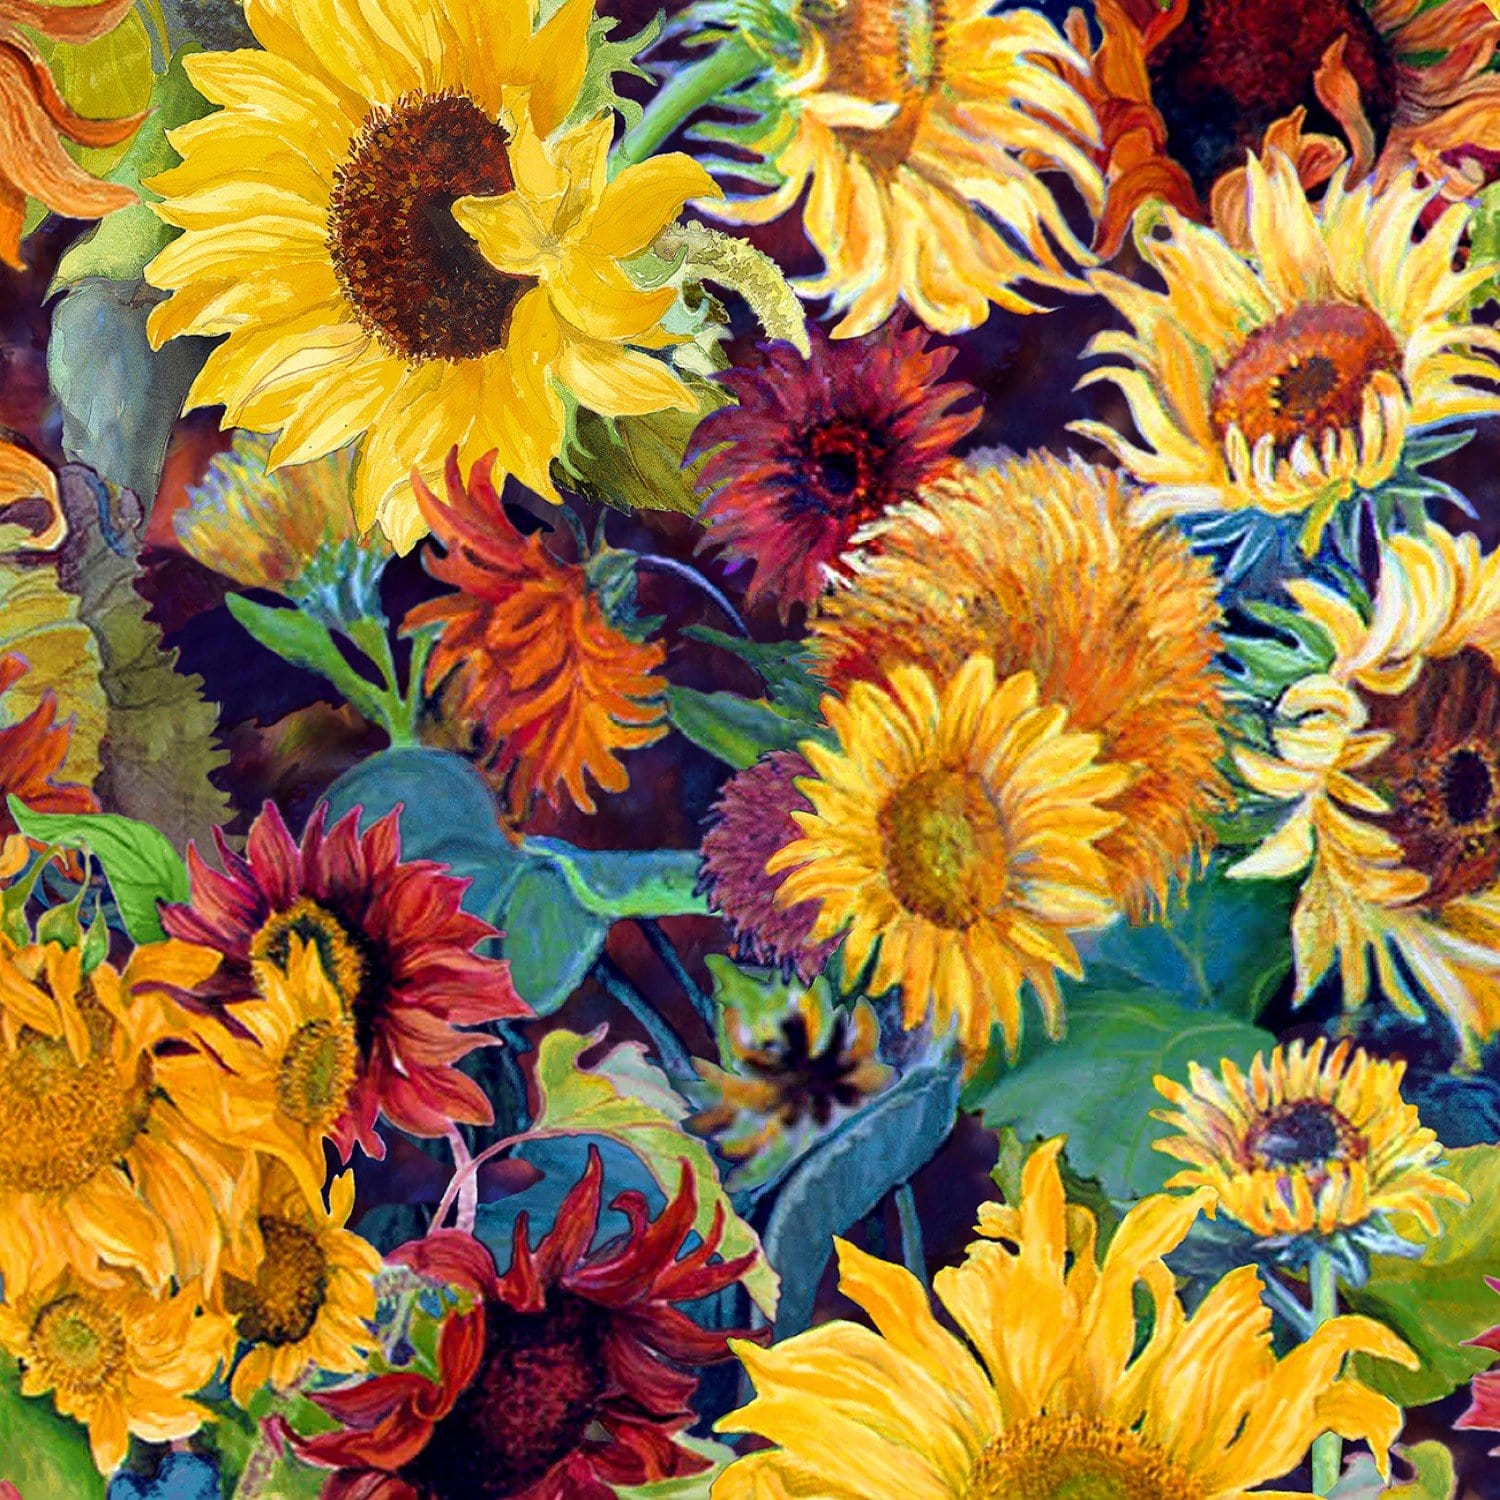 Multi Packed Sunflowers - 79276-753 - Wilmington Prints - Autumn in Vermont